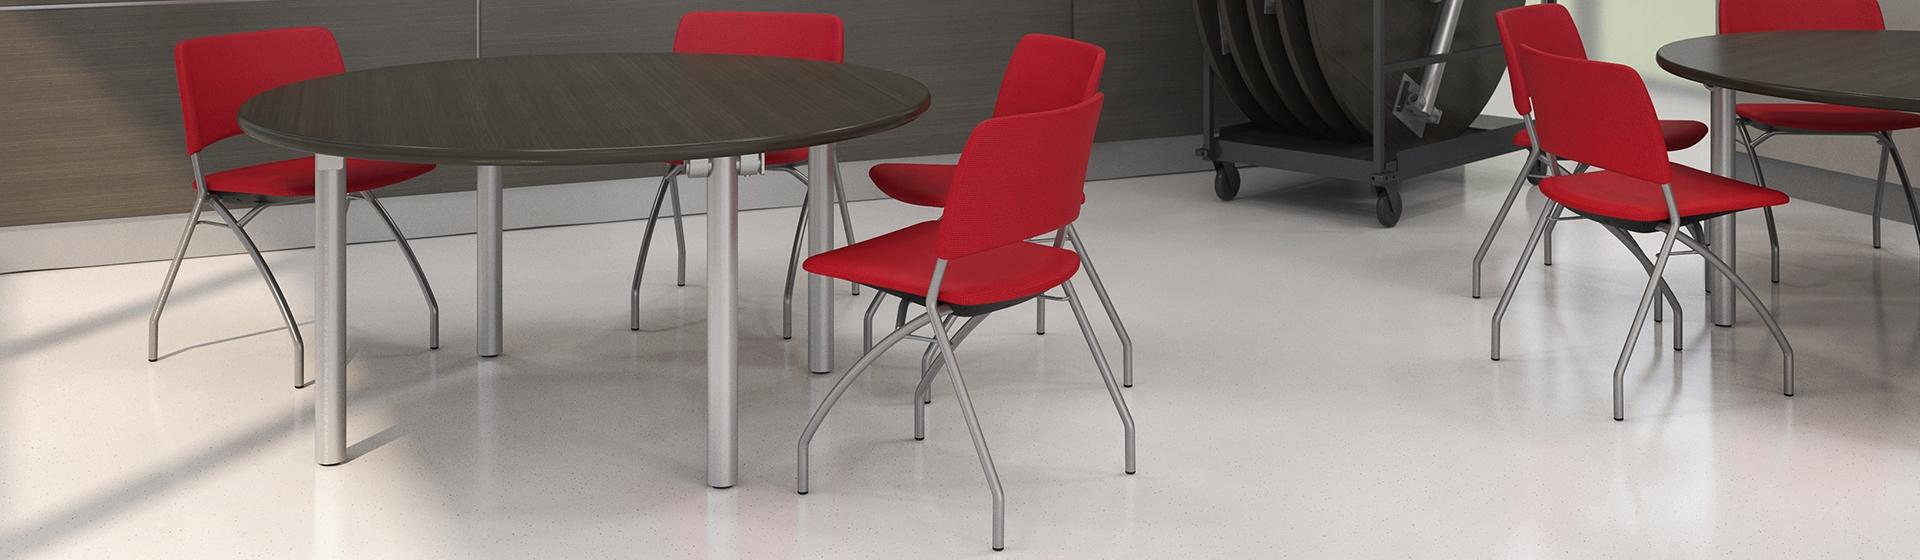 Post legs table with red fabric